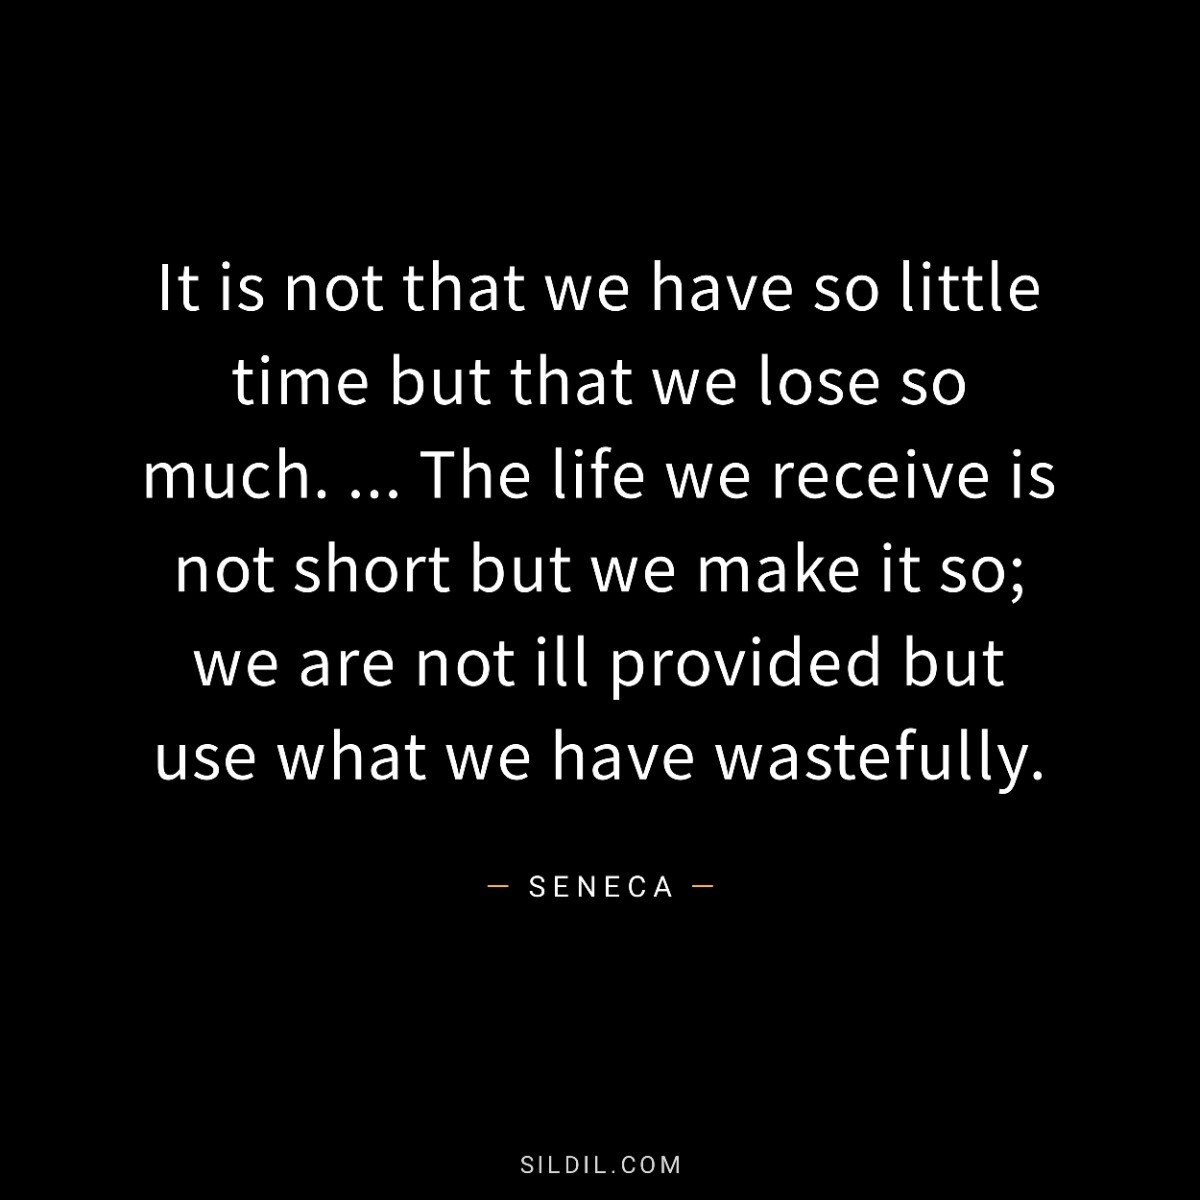 It is not that we have so little time but that we lose so much. ... The life we receive is not short but we make it so; we are not ill provided but use what we have wastefully.